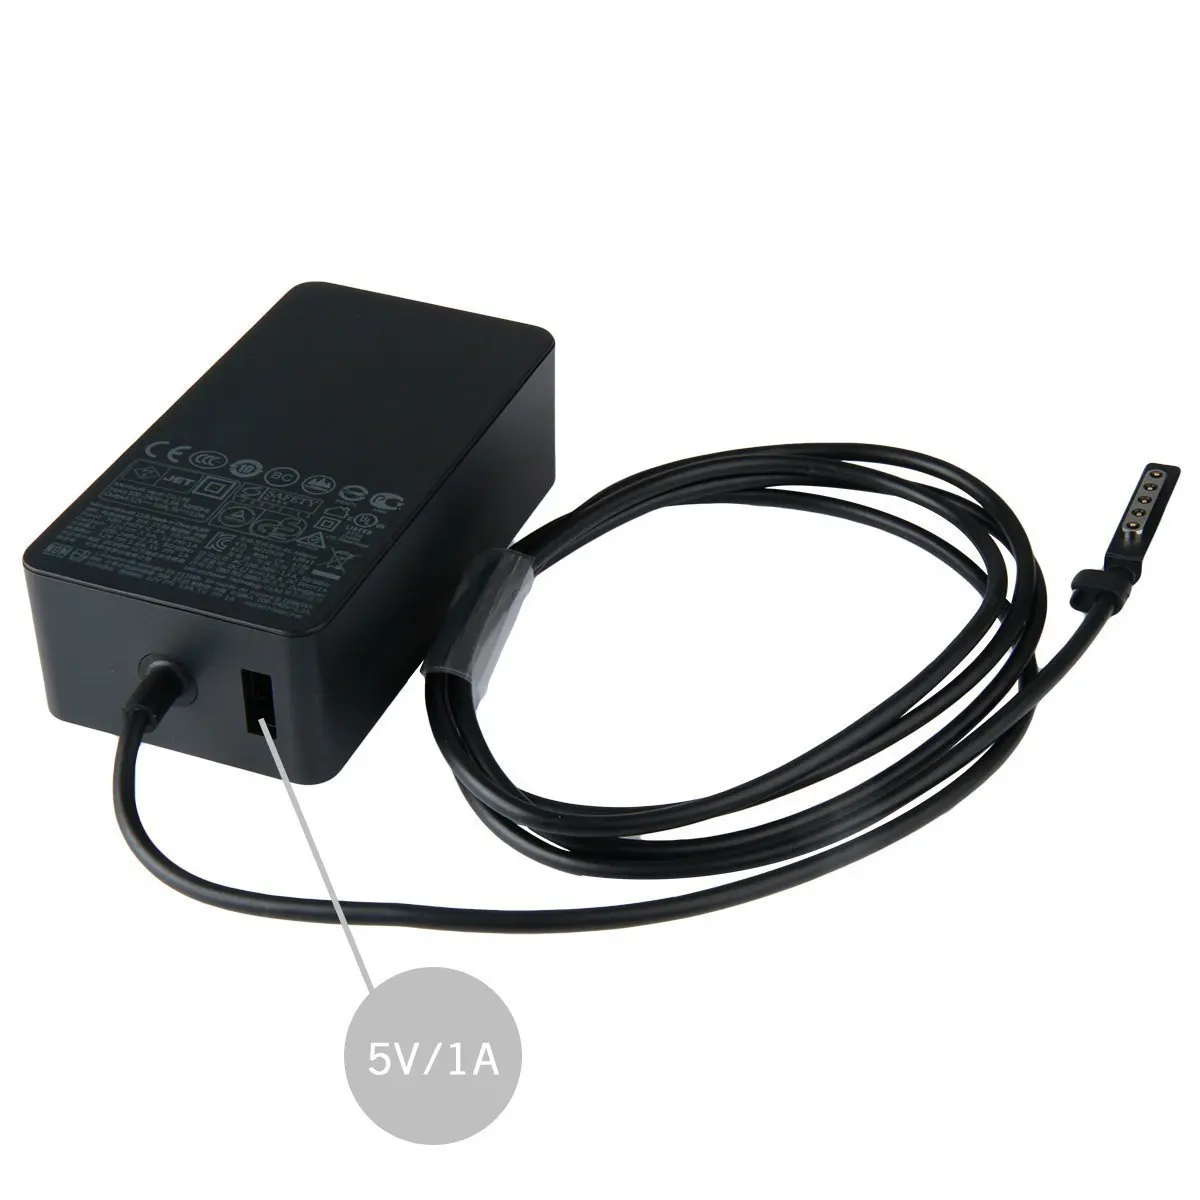 Buy Ebk New 48w Charger With Usb Charging Port Works Exclusively For Microsoft Surface Pro 2 Pro 2 And 10 1 Windows 8 Tablet Pc In Cheap Price On Alibaba Com